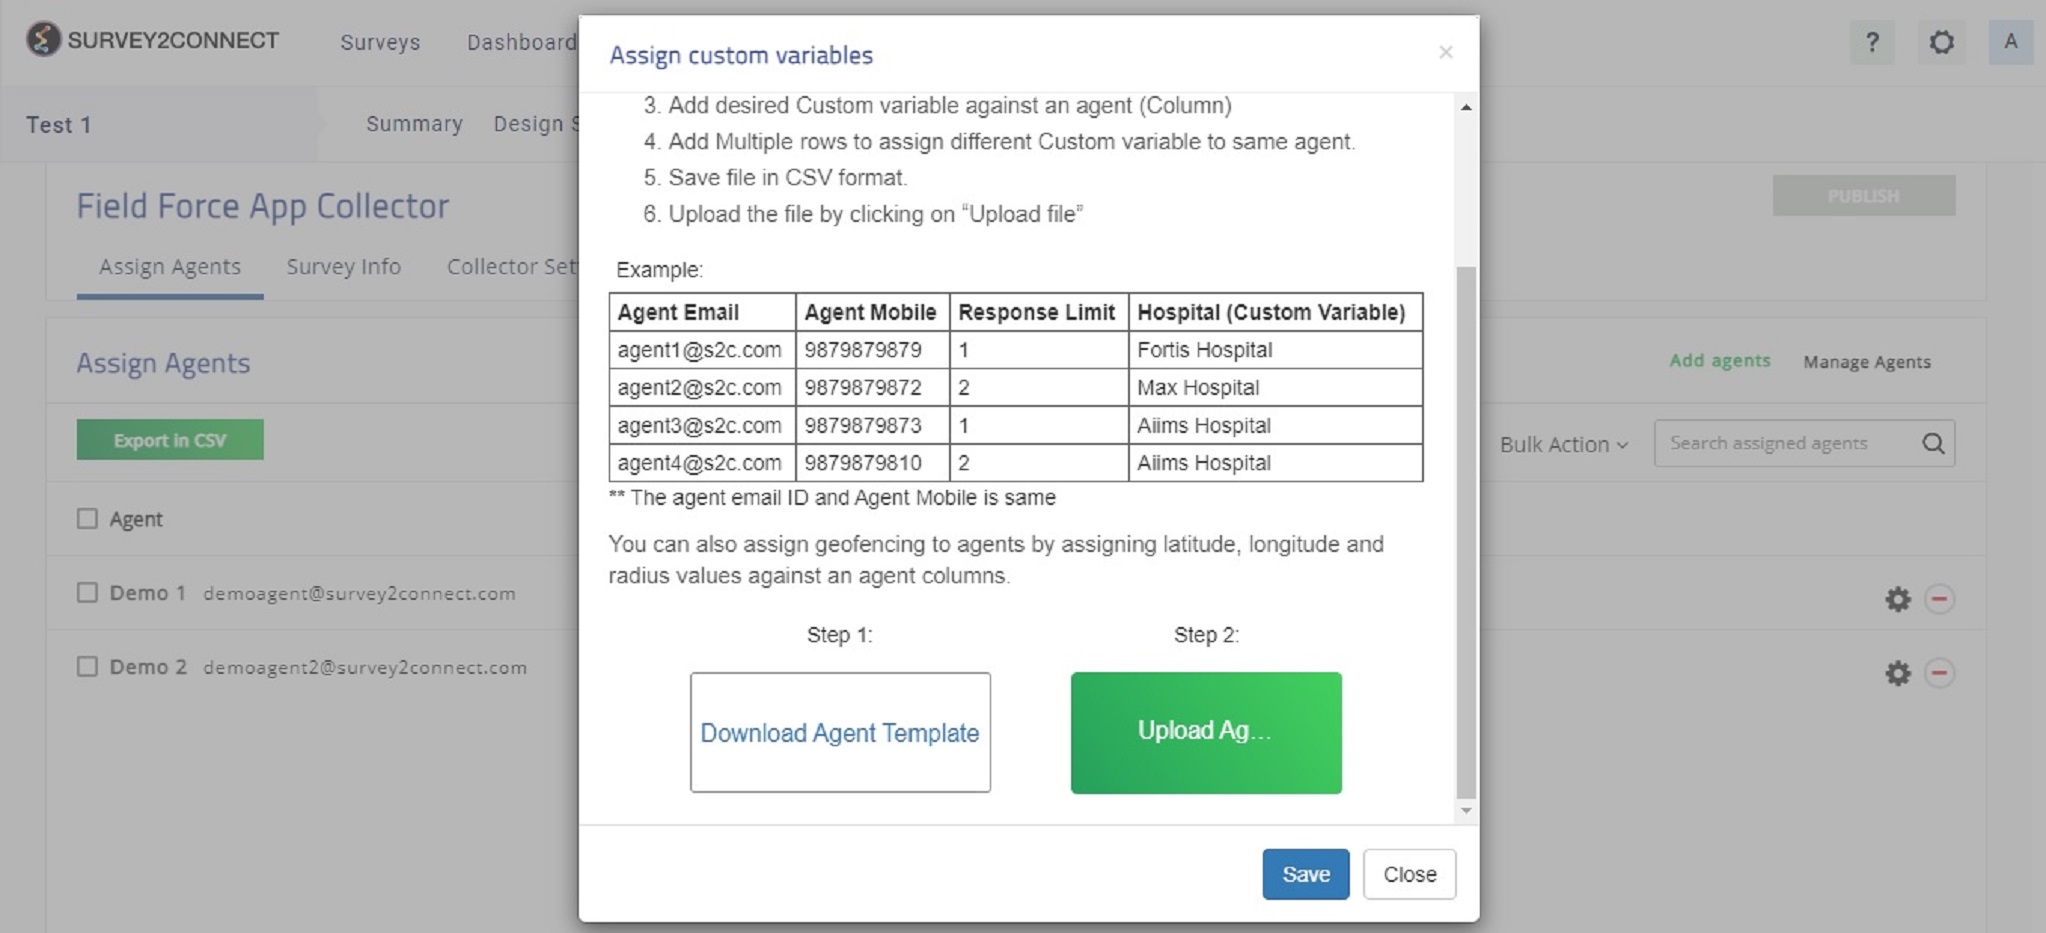 You can assign custom variables that will be shown to the agent in the field force collector. You can use it to add data that will be shown in app